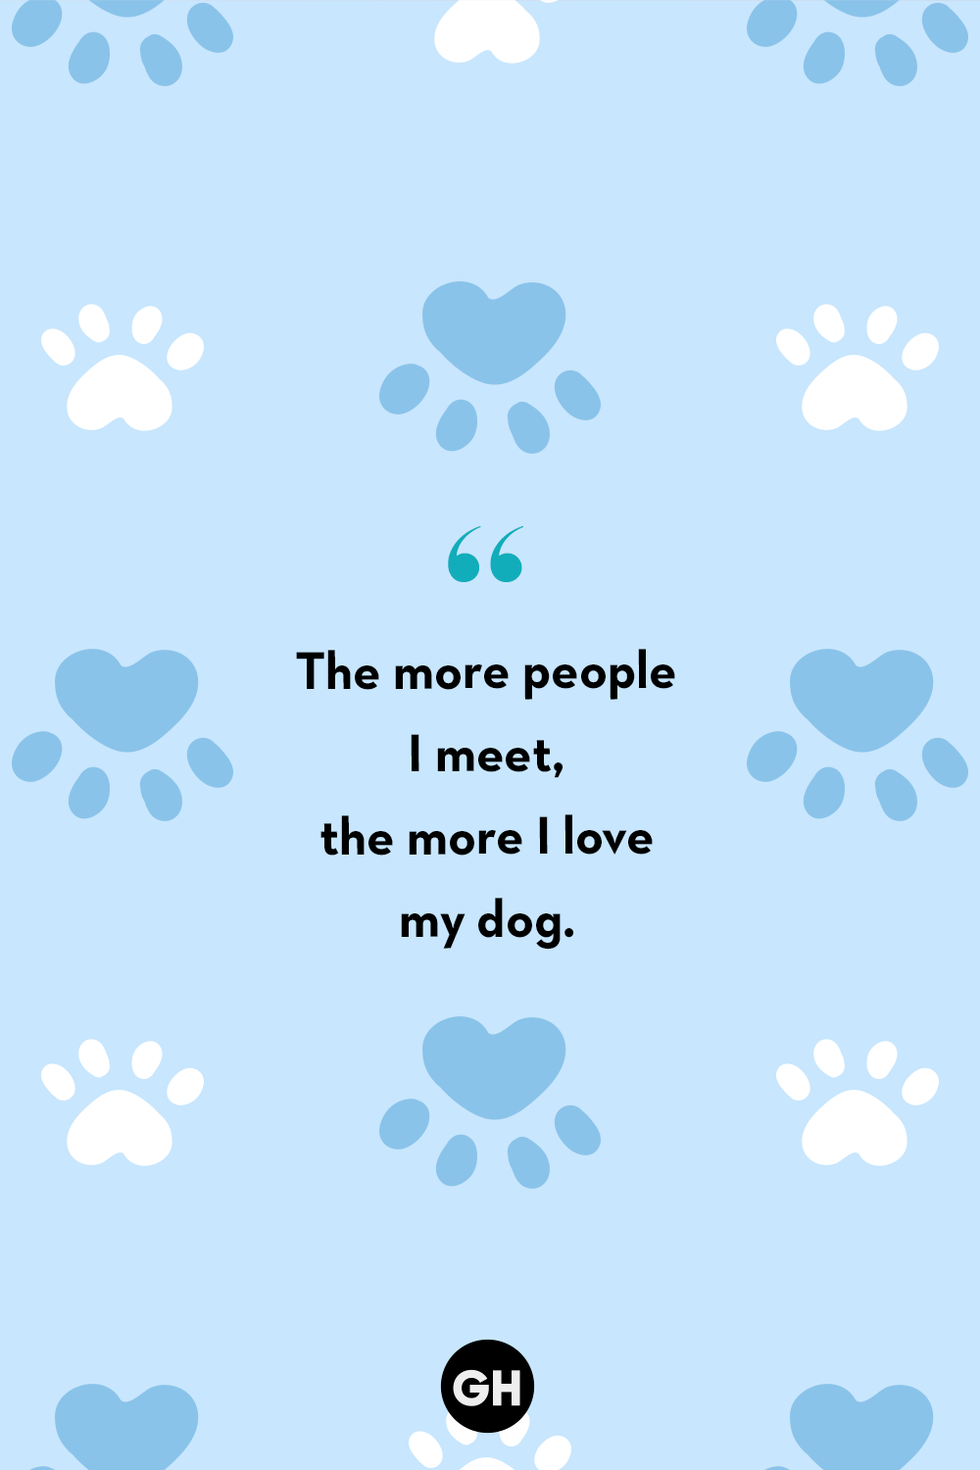 Cute dog quotes cute dog quotes to inspire and uplift